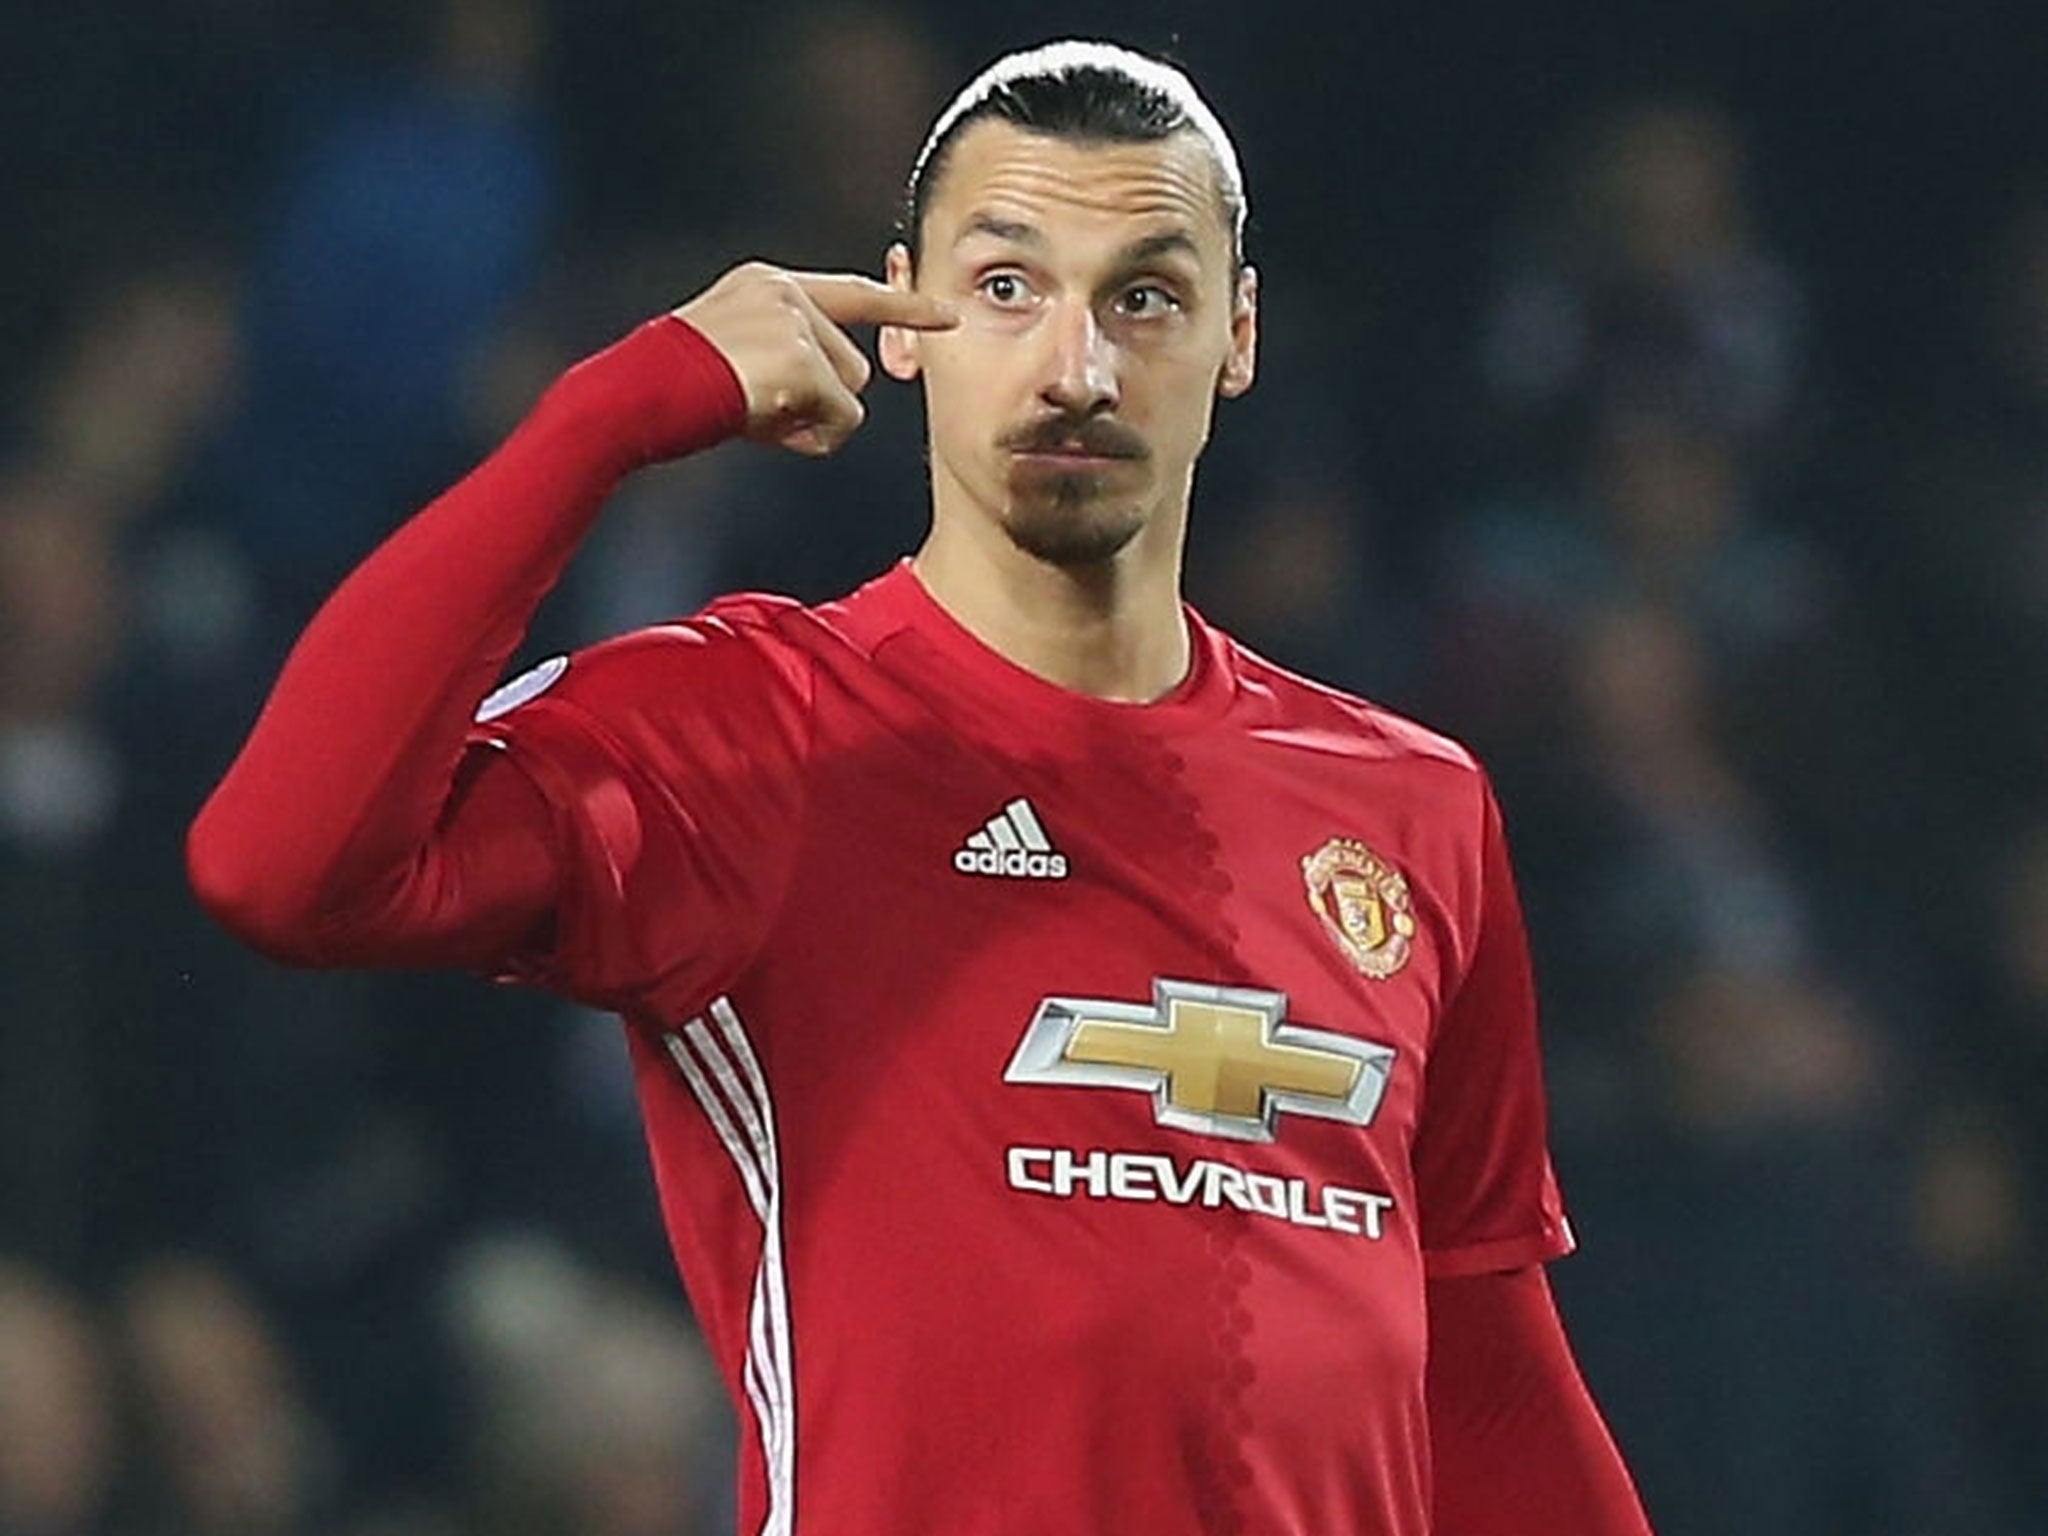 Zlatan Ibrahimovic has been lauded as a 'superman' by Manchester United manager Jose Mourinho